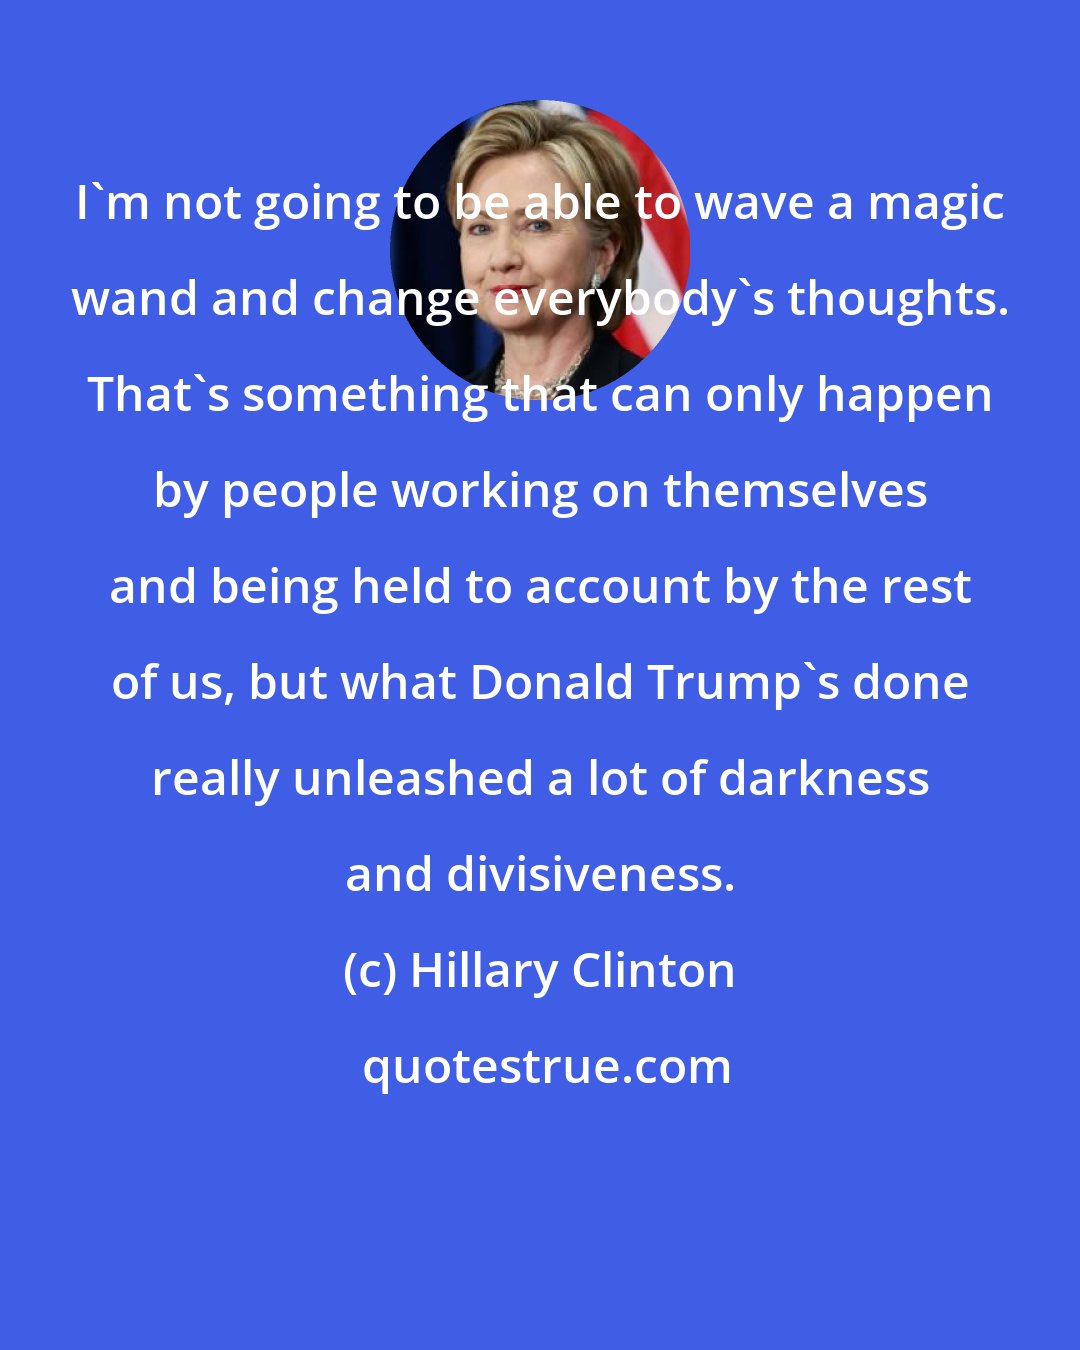 Hillary Clinton: I'm not going to be able to wave a magic wand and change everybody's thoughts. That's something that can only happen by people working on themselves and being held to account by the rest of us, but what Donald Trump's done really unleashed a lot of darkness and divisiveness.